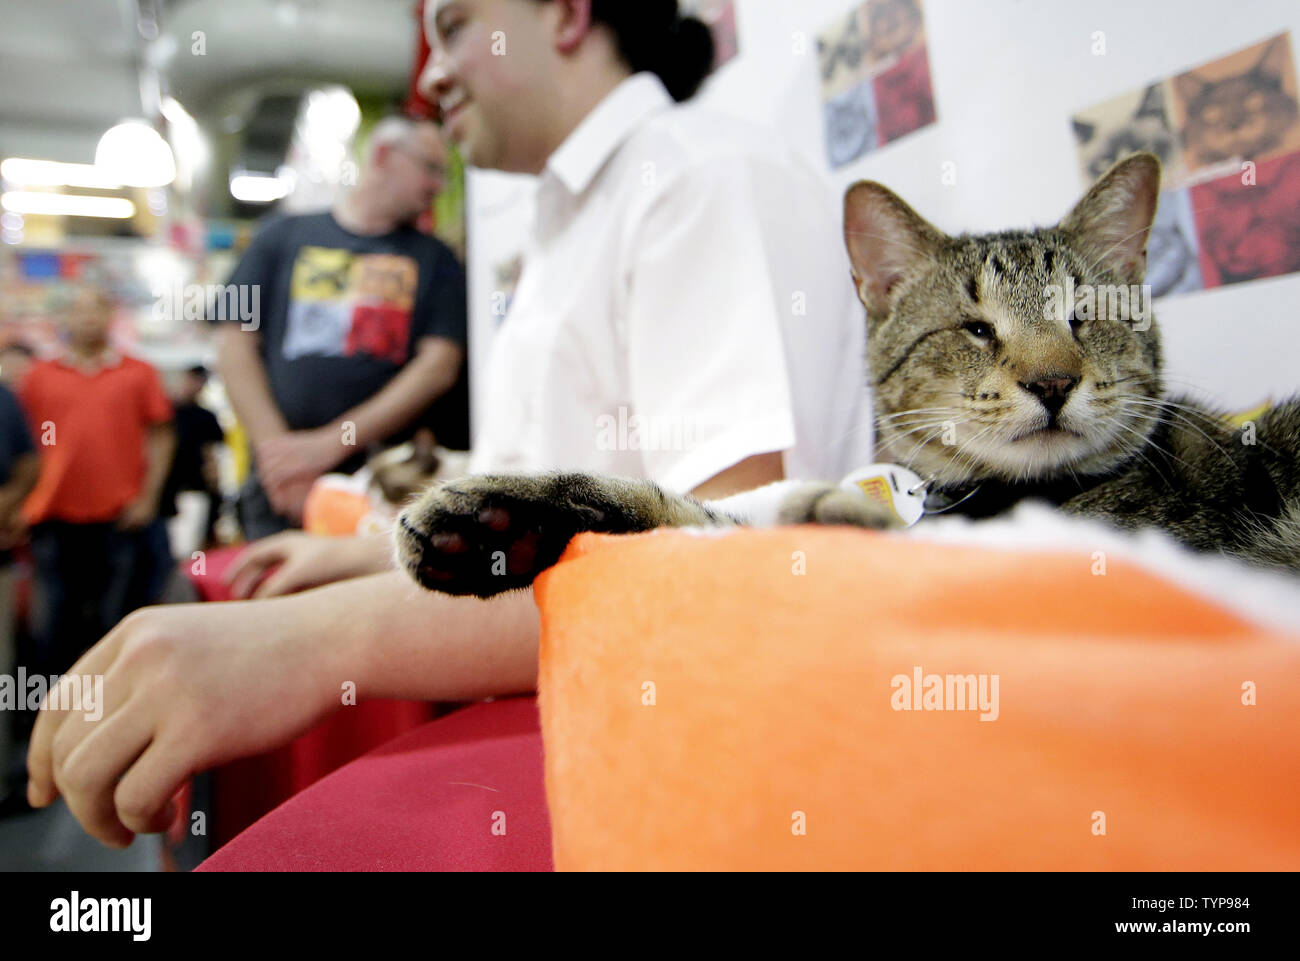 A fan takes a picture with feline internet sensations Grumpy Cat and Oskar the Blind Cat when they make a special appearance at Bleecker Street Records in New York City on July 16, 2014. The duo will debut their new music video 'Cat Summer' on July 16th. Grumpy Cat will return next month for promotional activities in support of her book, The Grumpy Guide to Life: Observations from Grumpy Cat.    UPI/John Angelillo Stock Photo